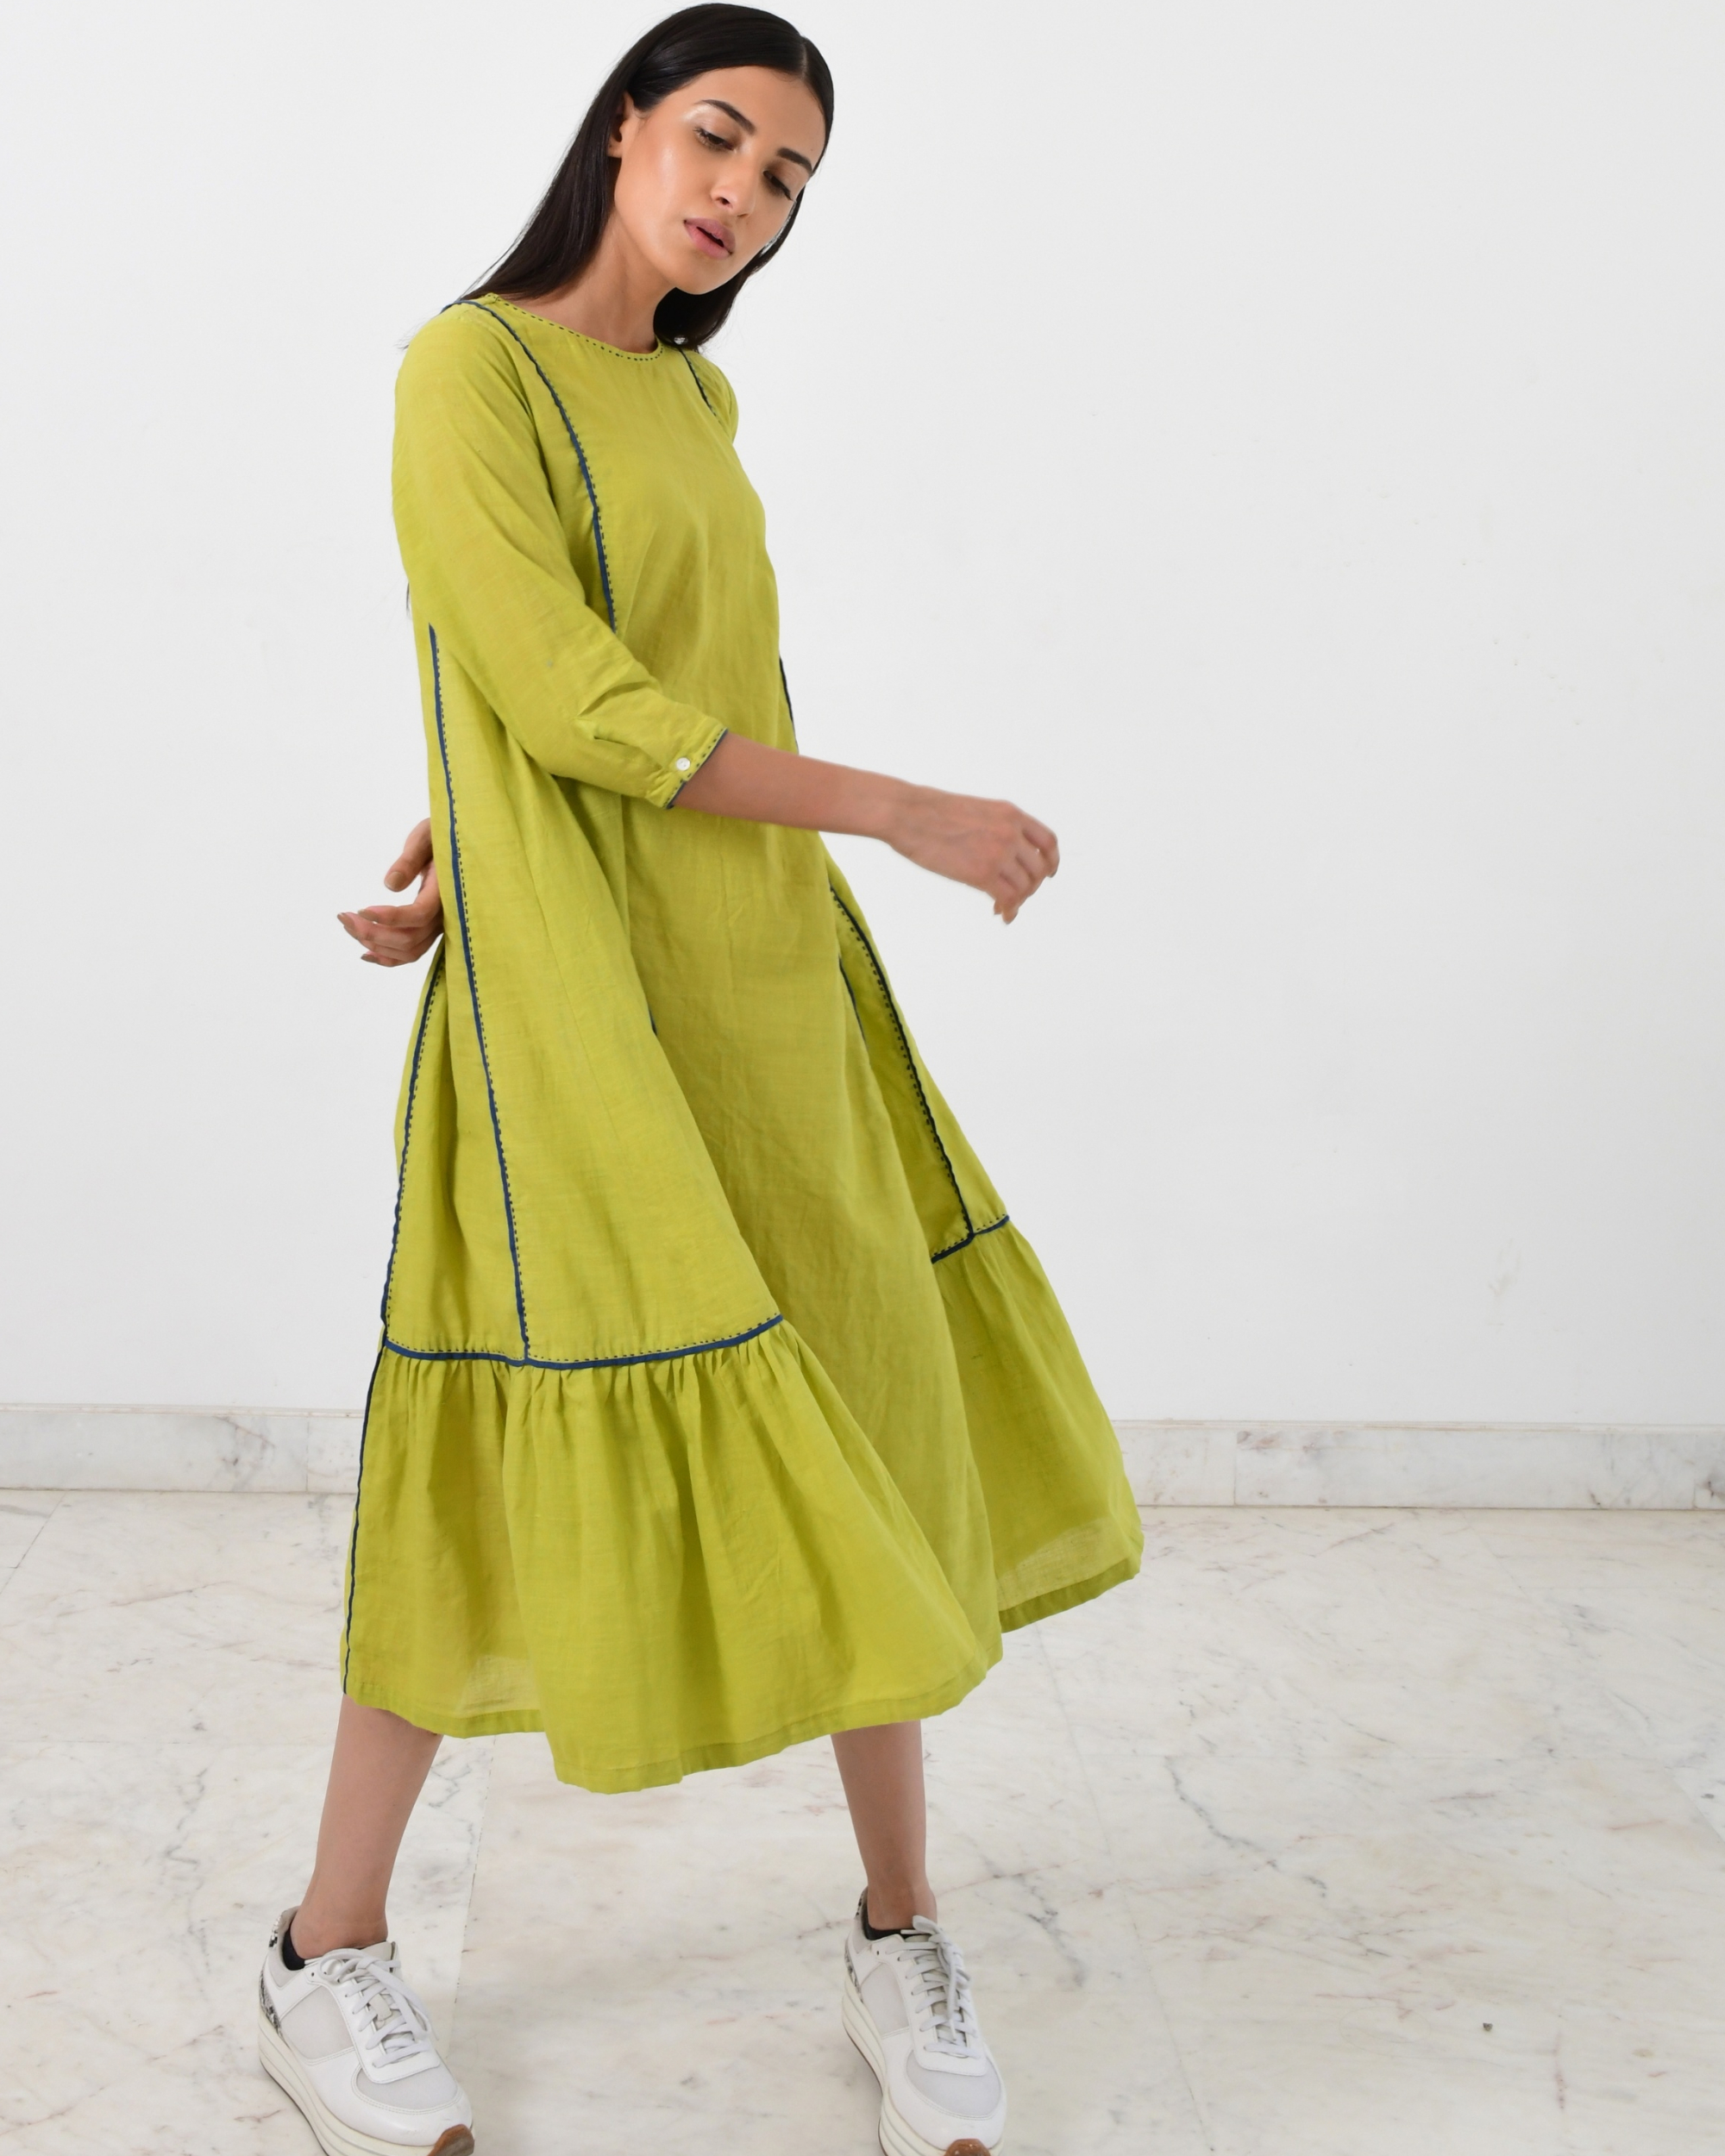 Green paneled cotton dress with contrasting piping by Rias | The Secret ...